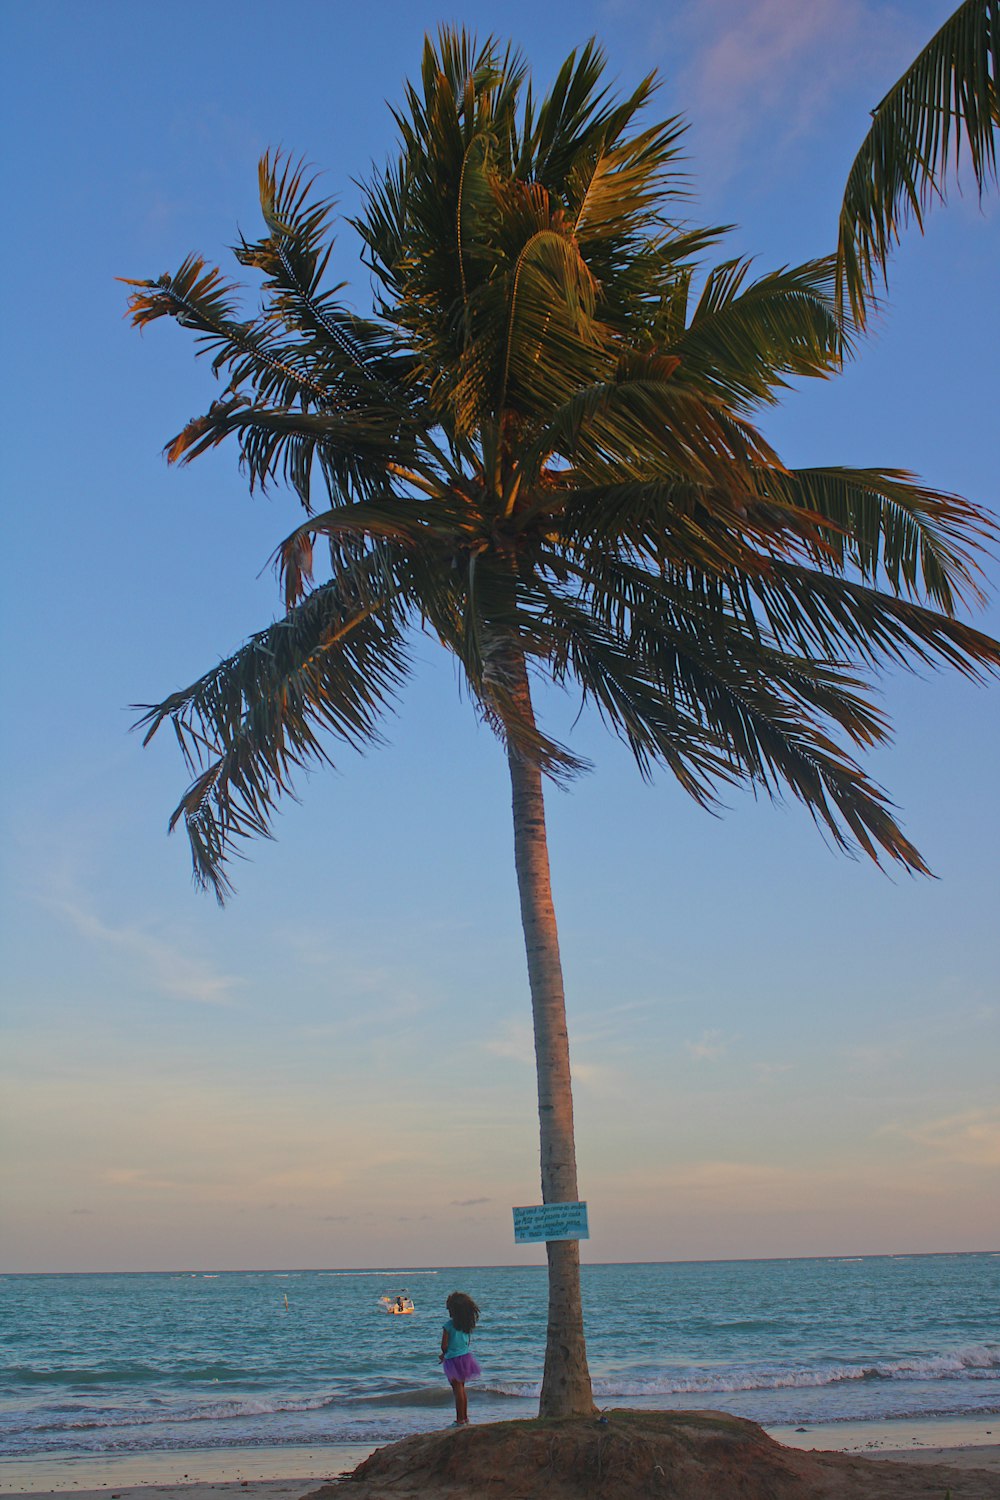 palm tree under blue sky during daytime